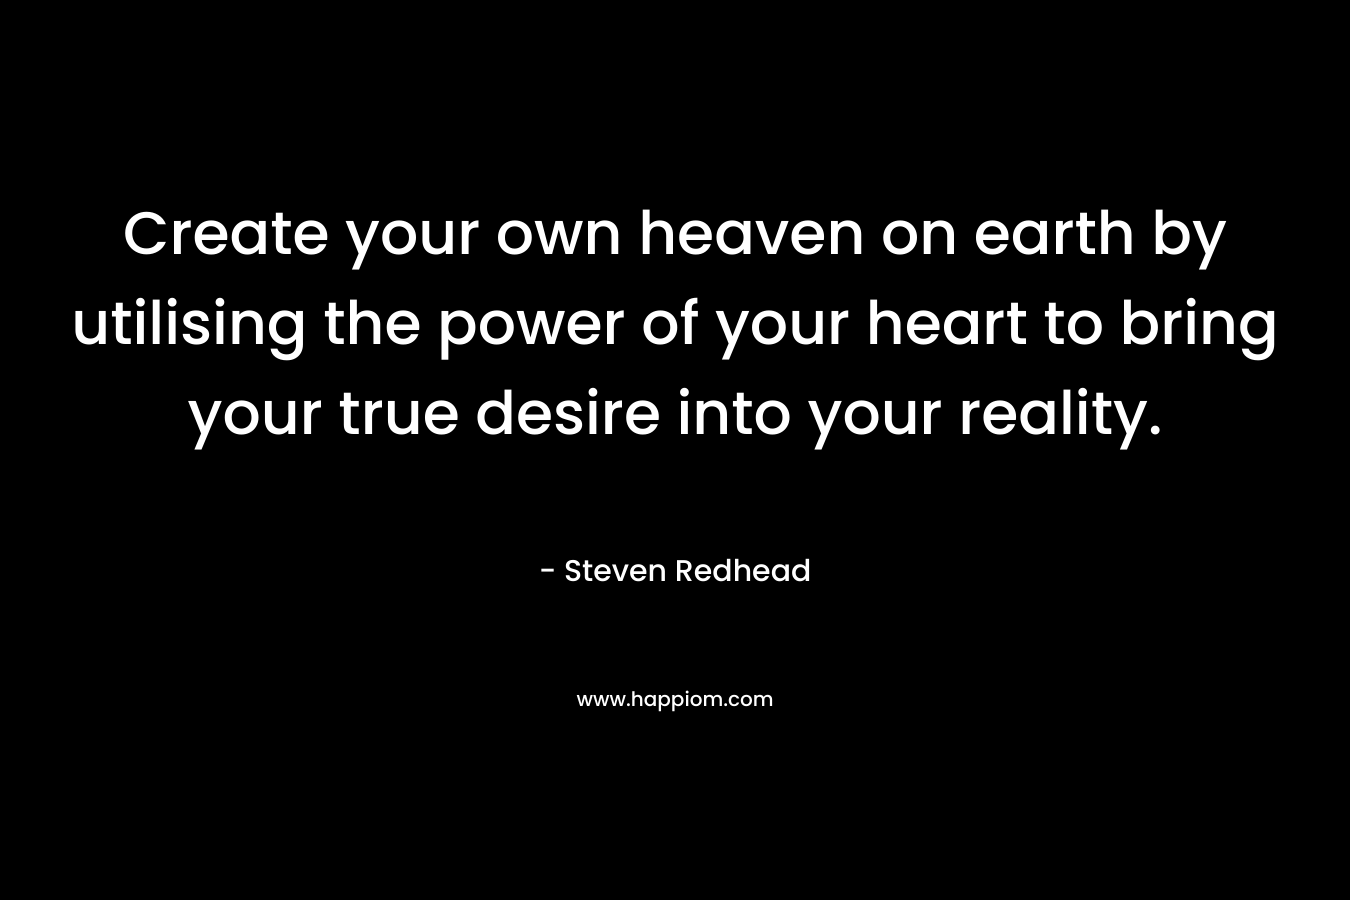 Create your own heaven on earth by utilising the power of your heart to bring your true desire into your reality.